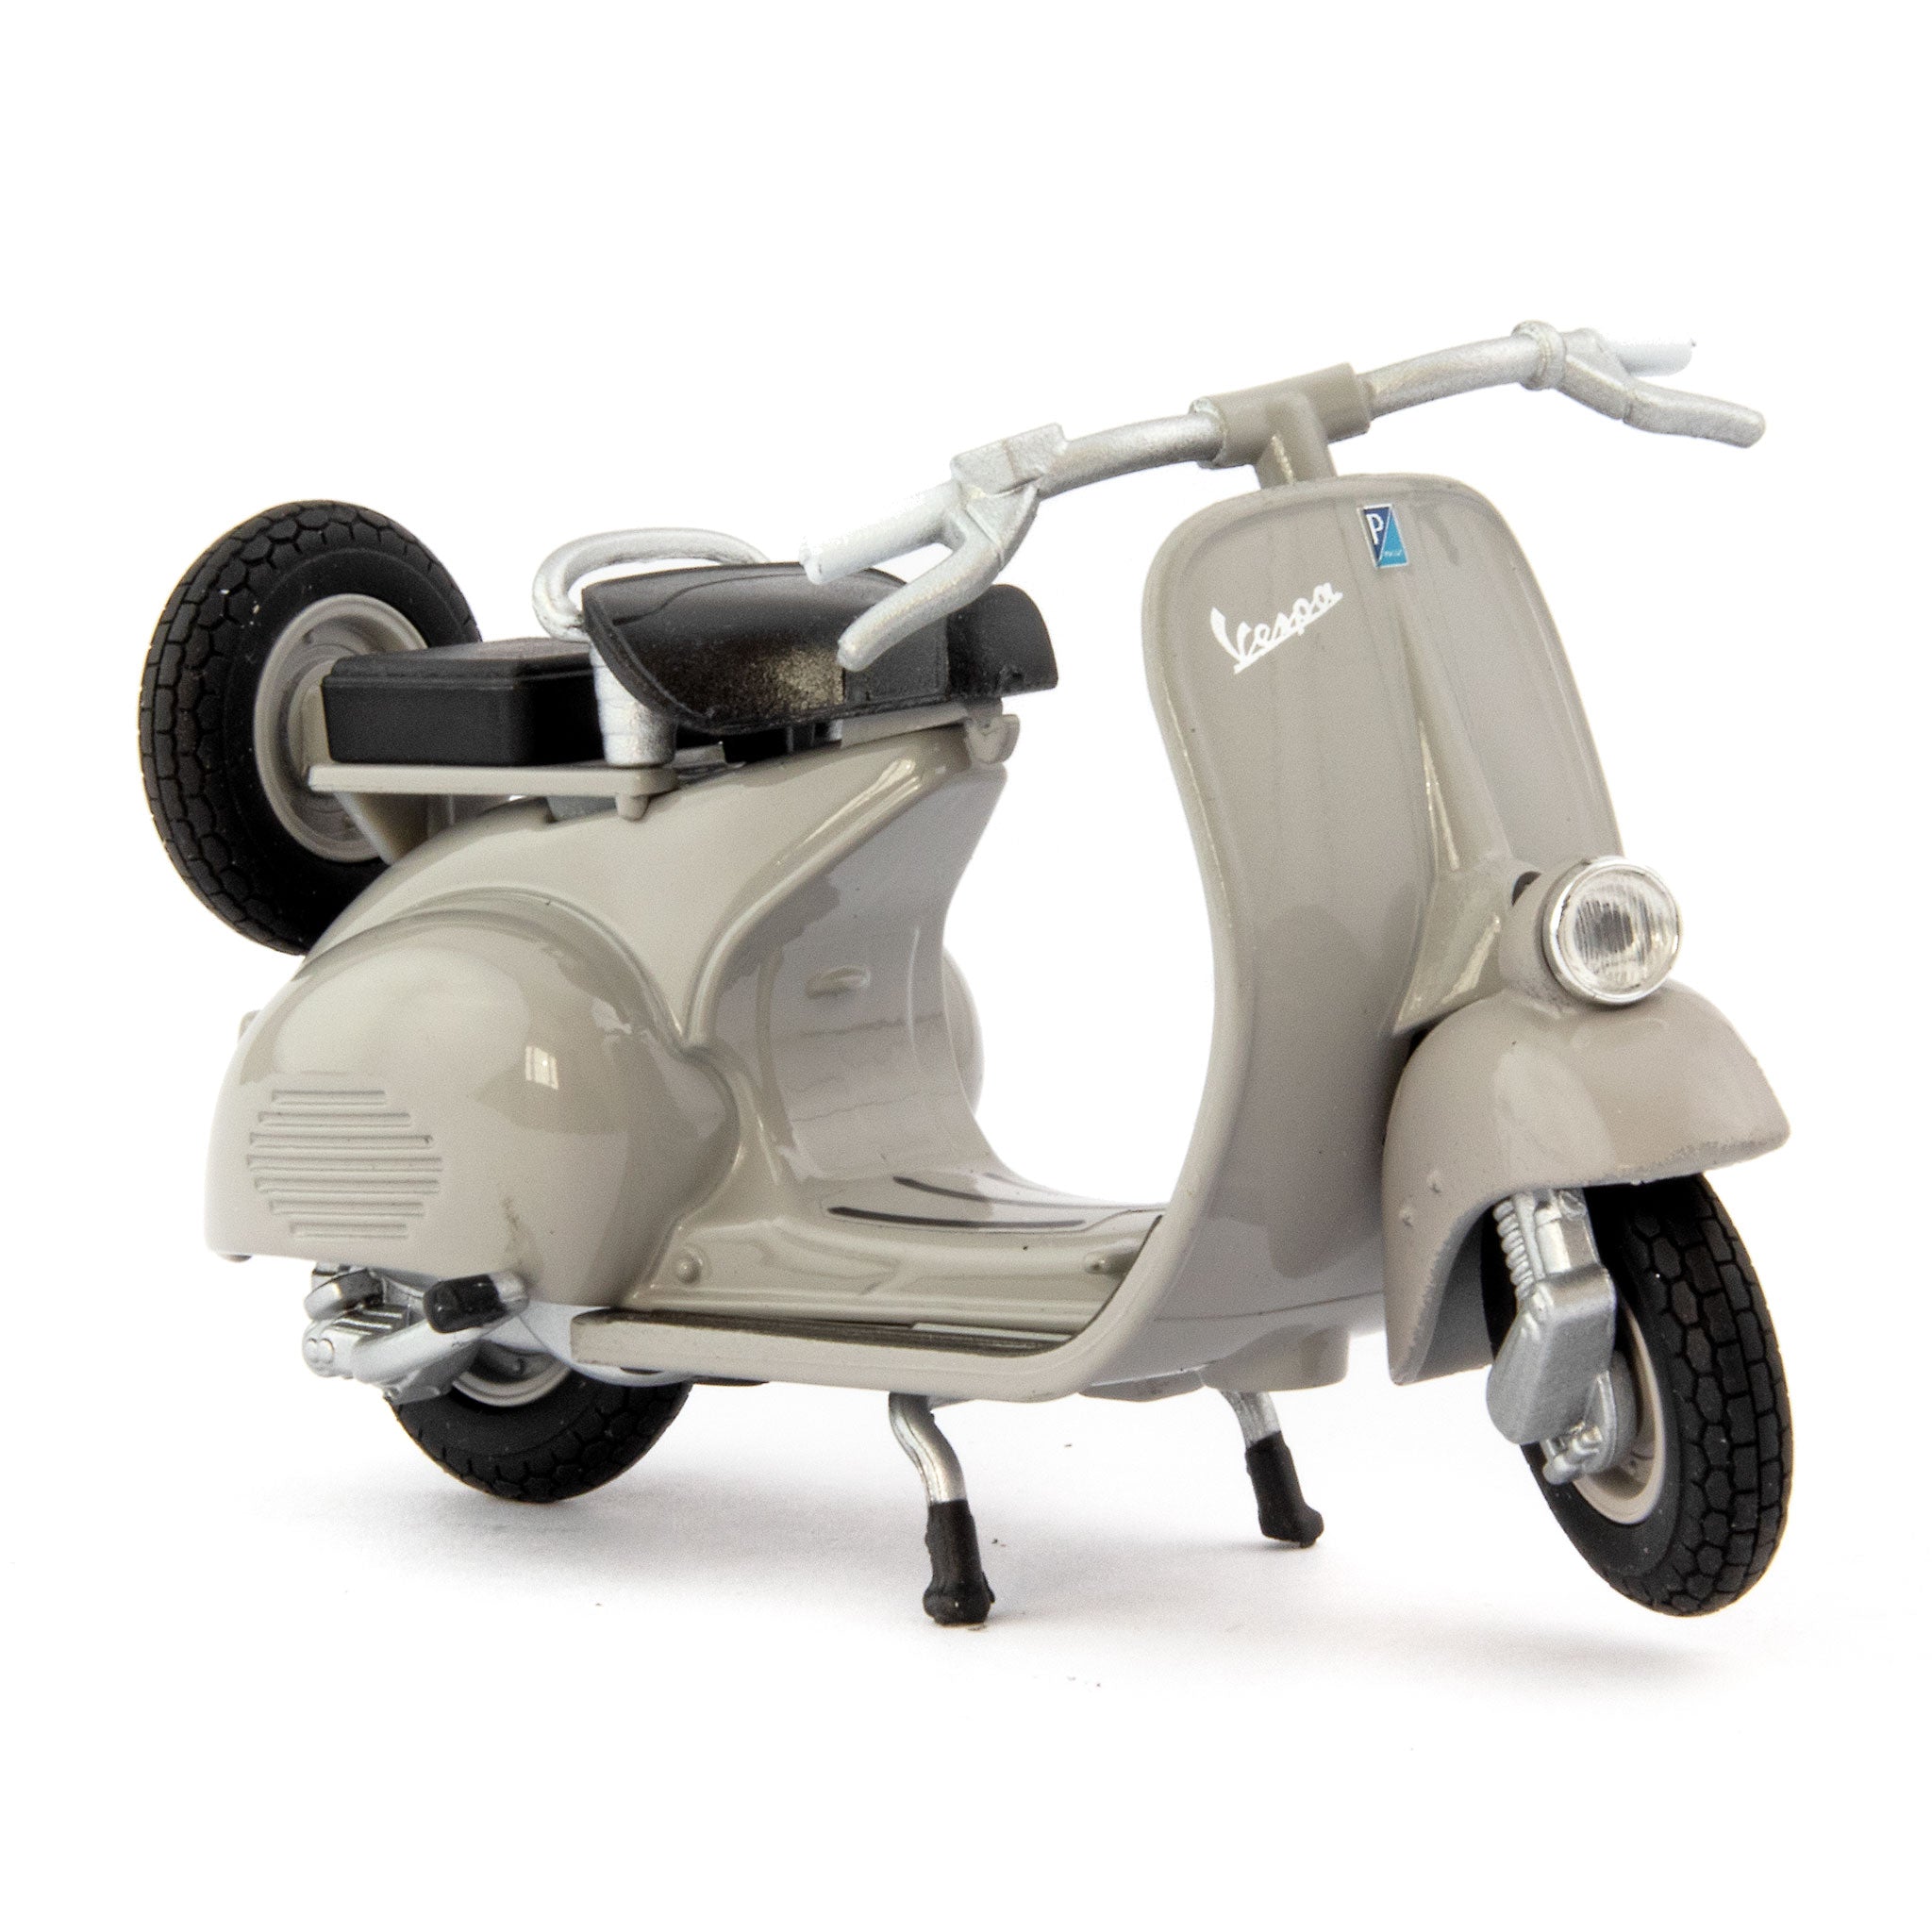 Vespa 124CC 1953 grey - 1:18 Scale Diecast Model Scooter-Welly-Diecast Model Centre